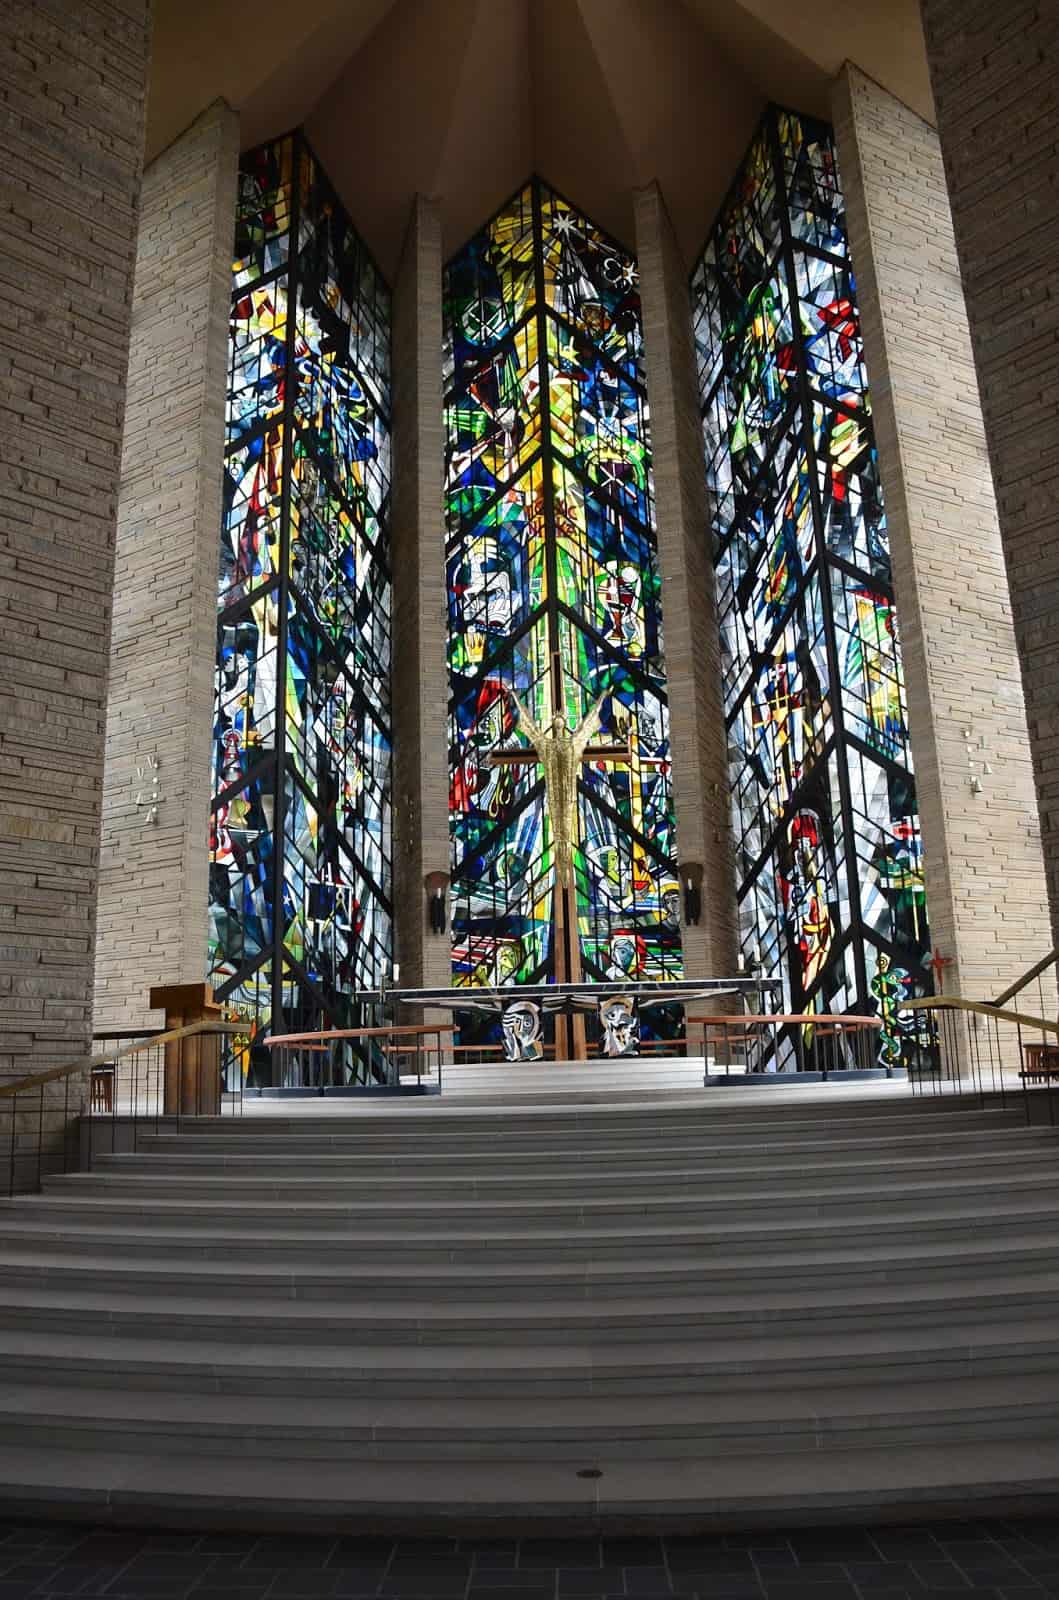 Stained glass window a the Chapel of the Resurrection at Valparaiso University